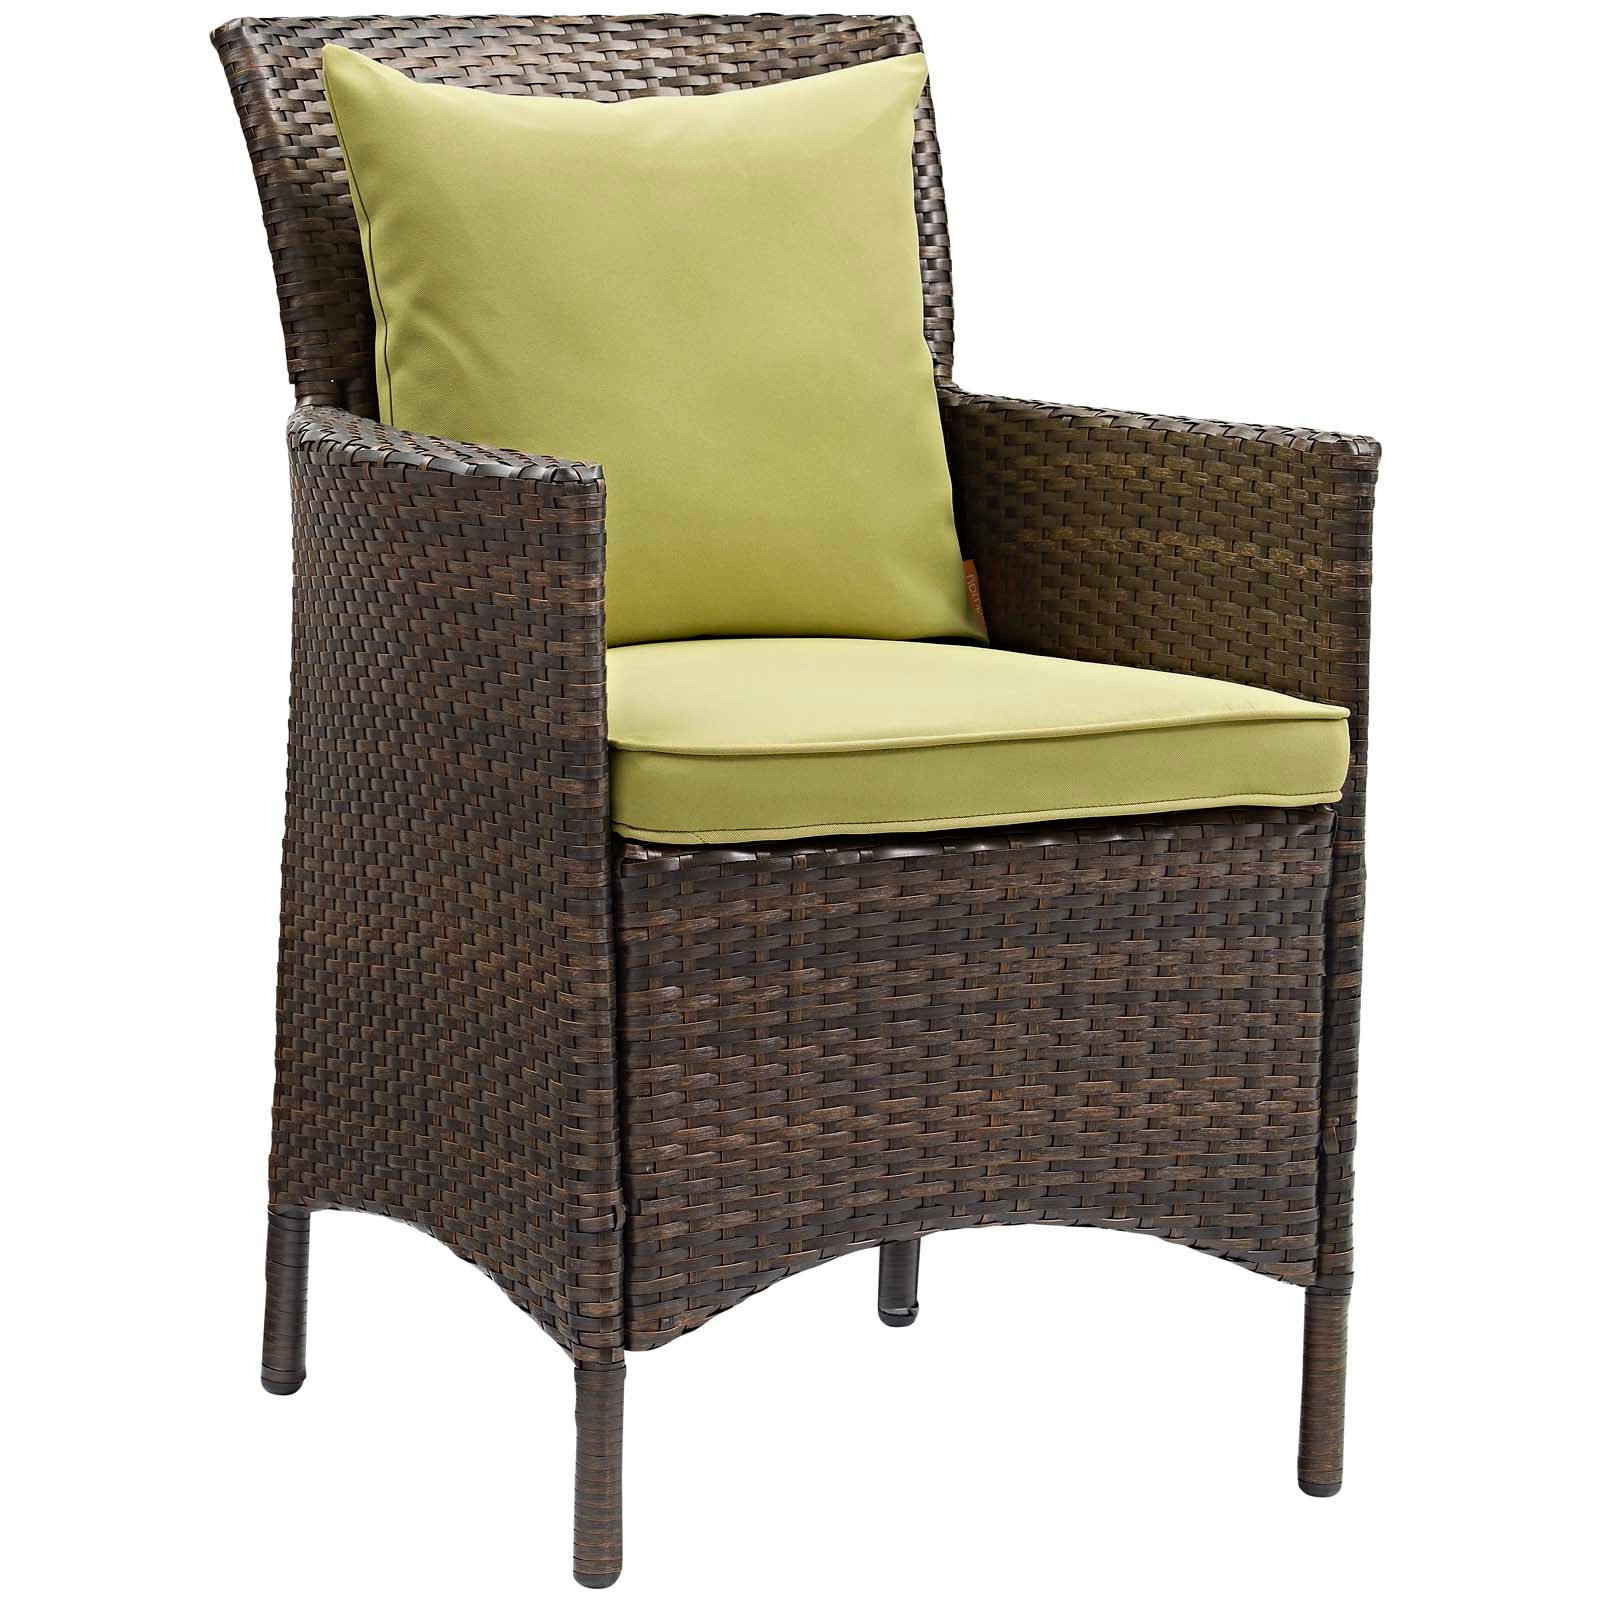 Modway Outdoor Dining Sets - Conduit Outdoor Patio Wicker Rattan Dining Armchair Set of 2 Brown Peridot